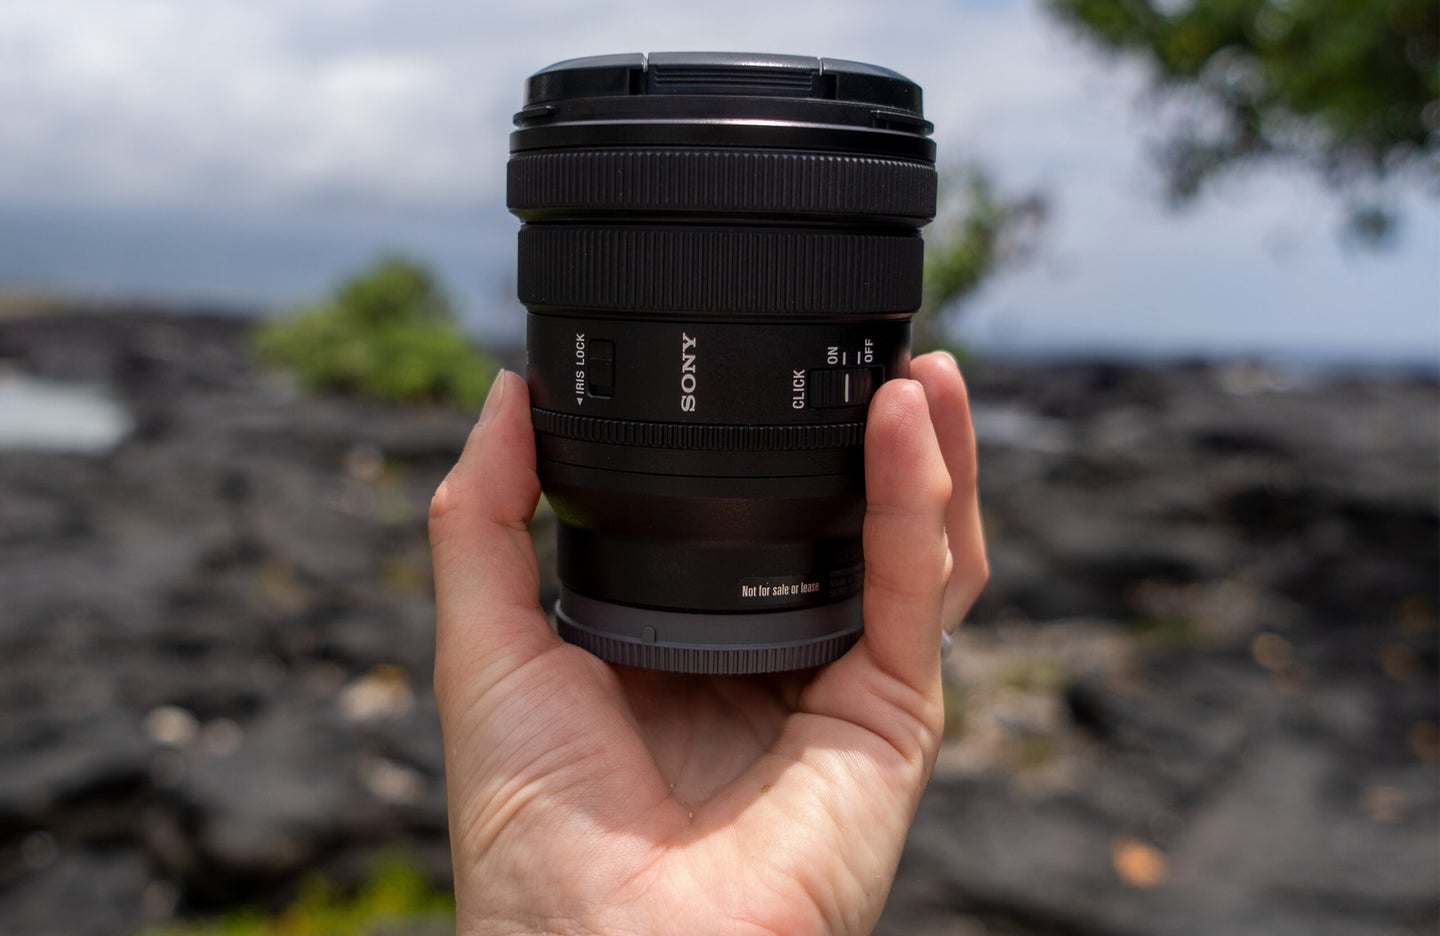 The Sony FE PZ 16-35mm f/4 G lens is a great lens for hybrid shooters.